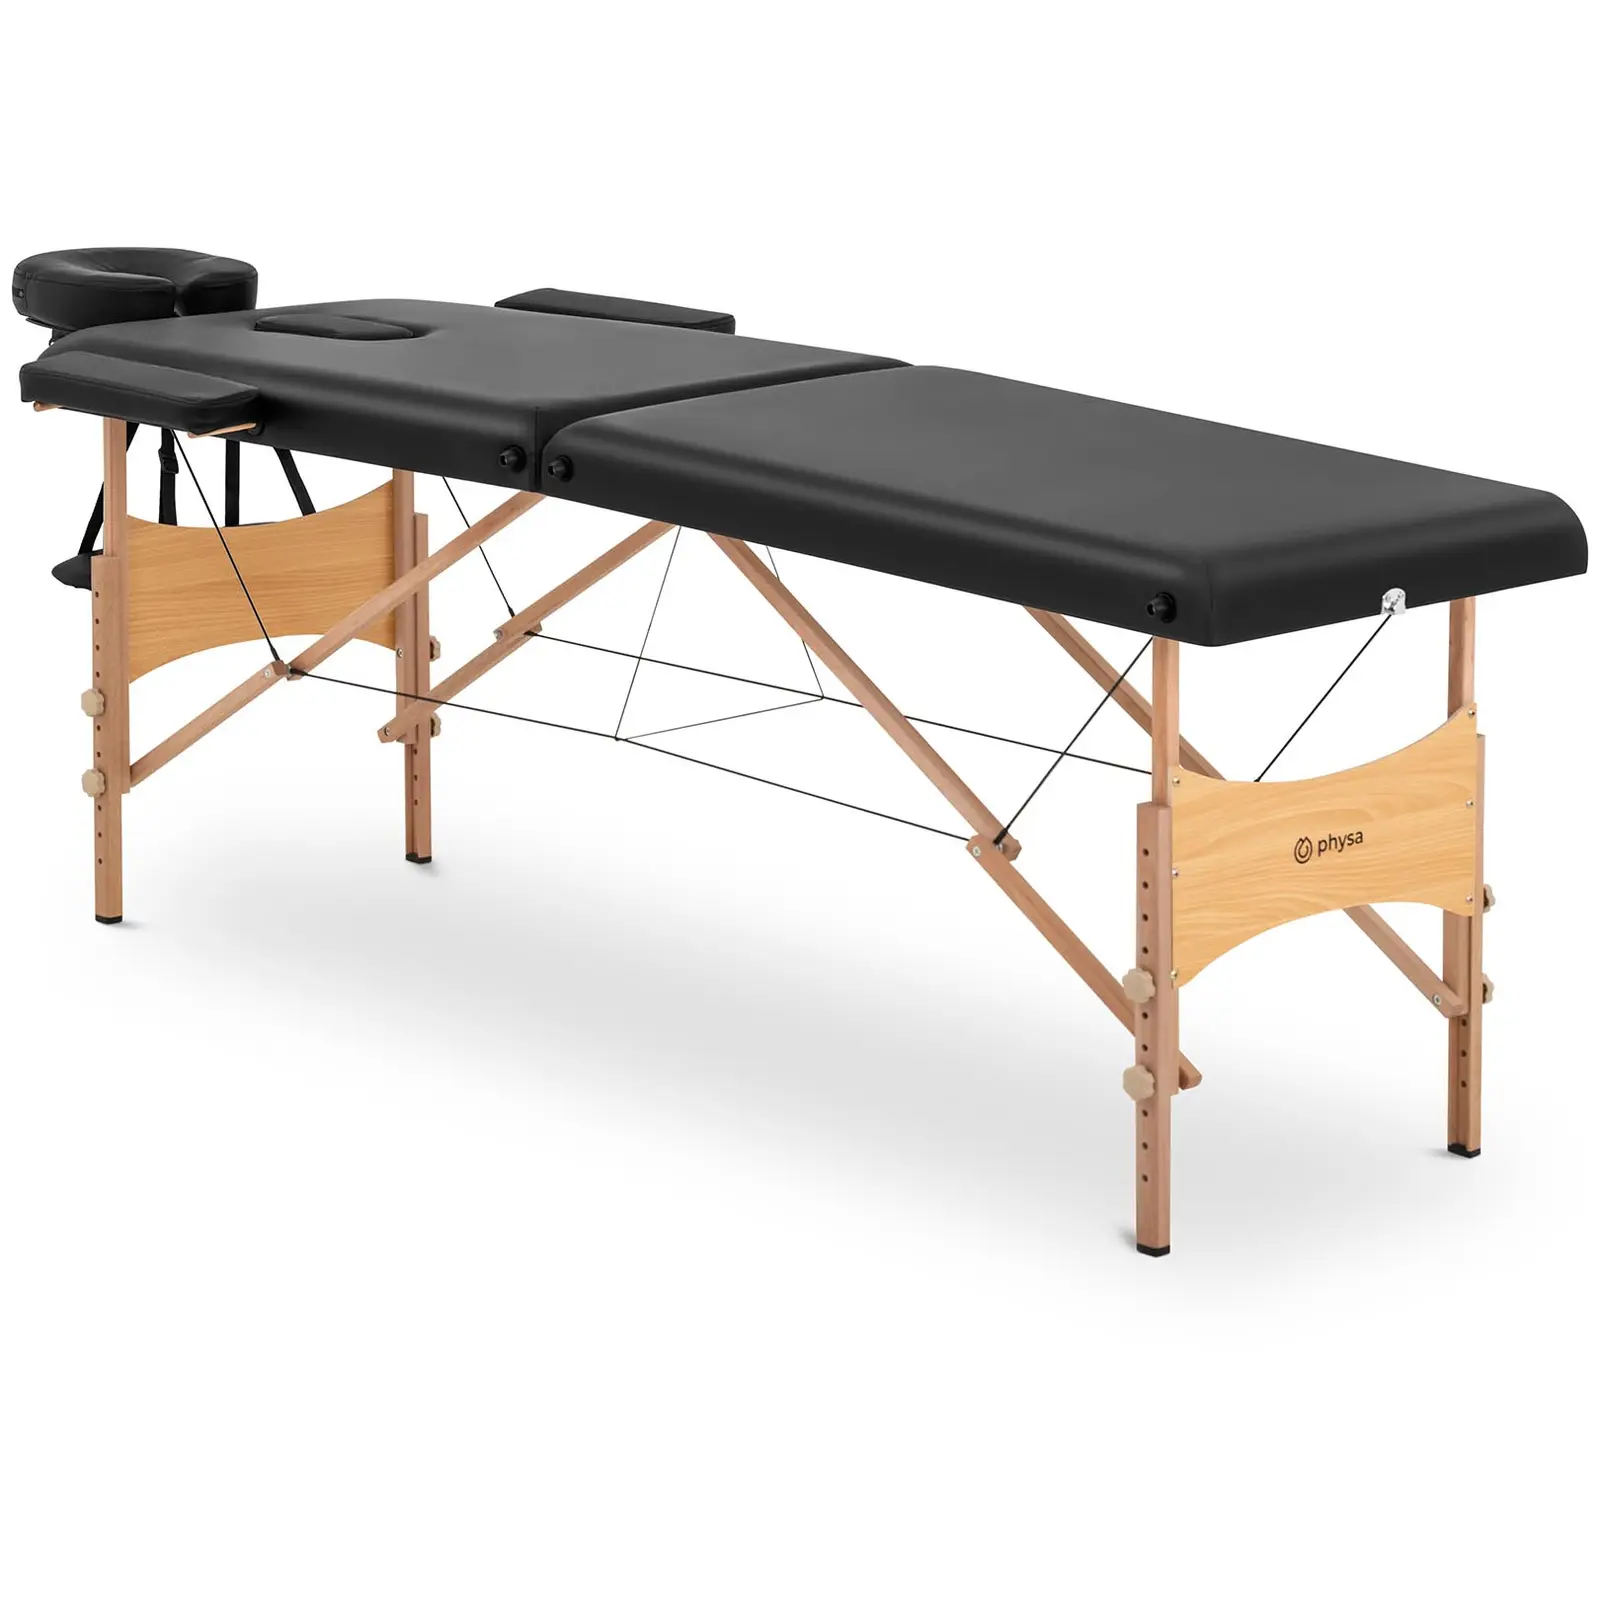 Foldable Massage Table - extra wide (70 cm) - inclining head- and footrest - beech wood - black